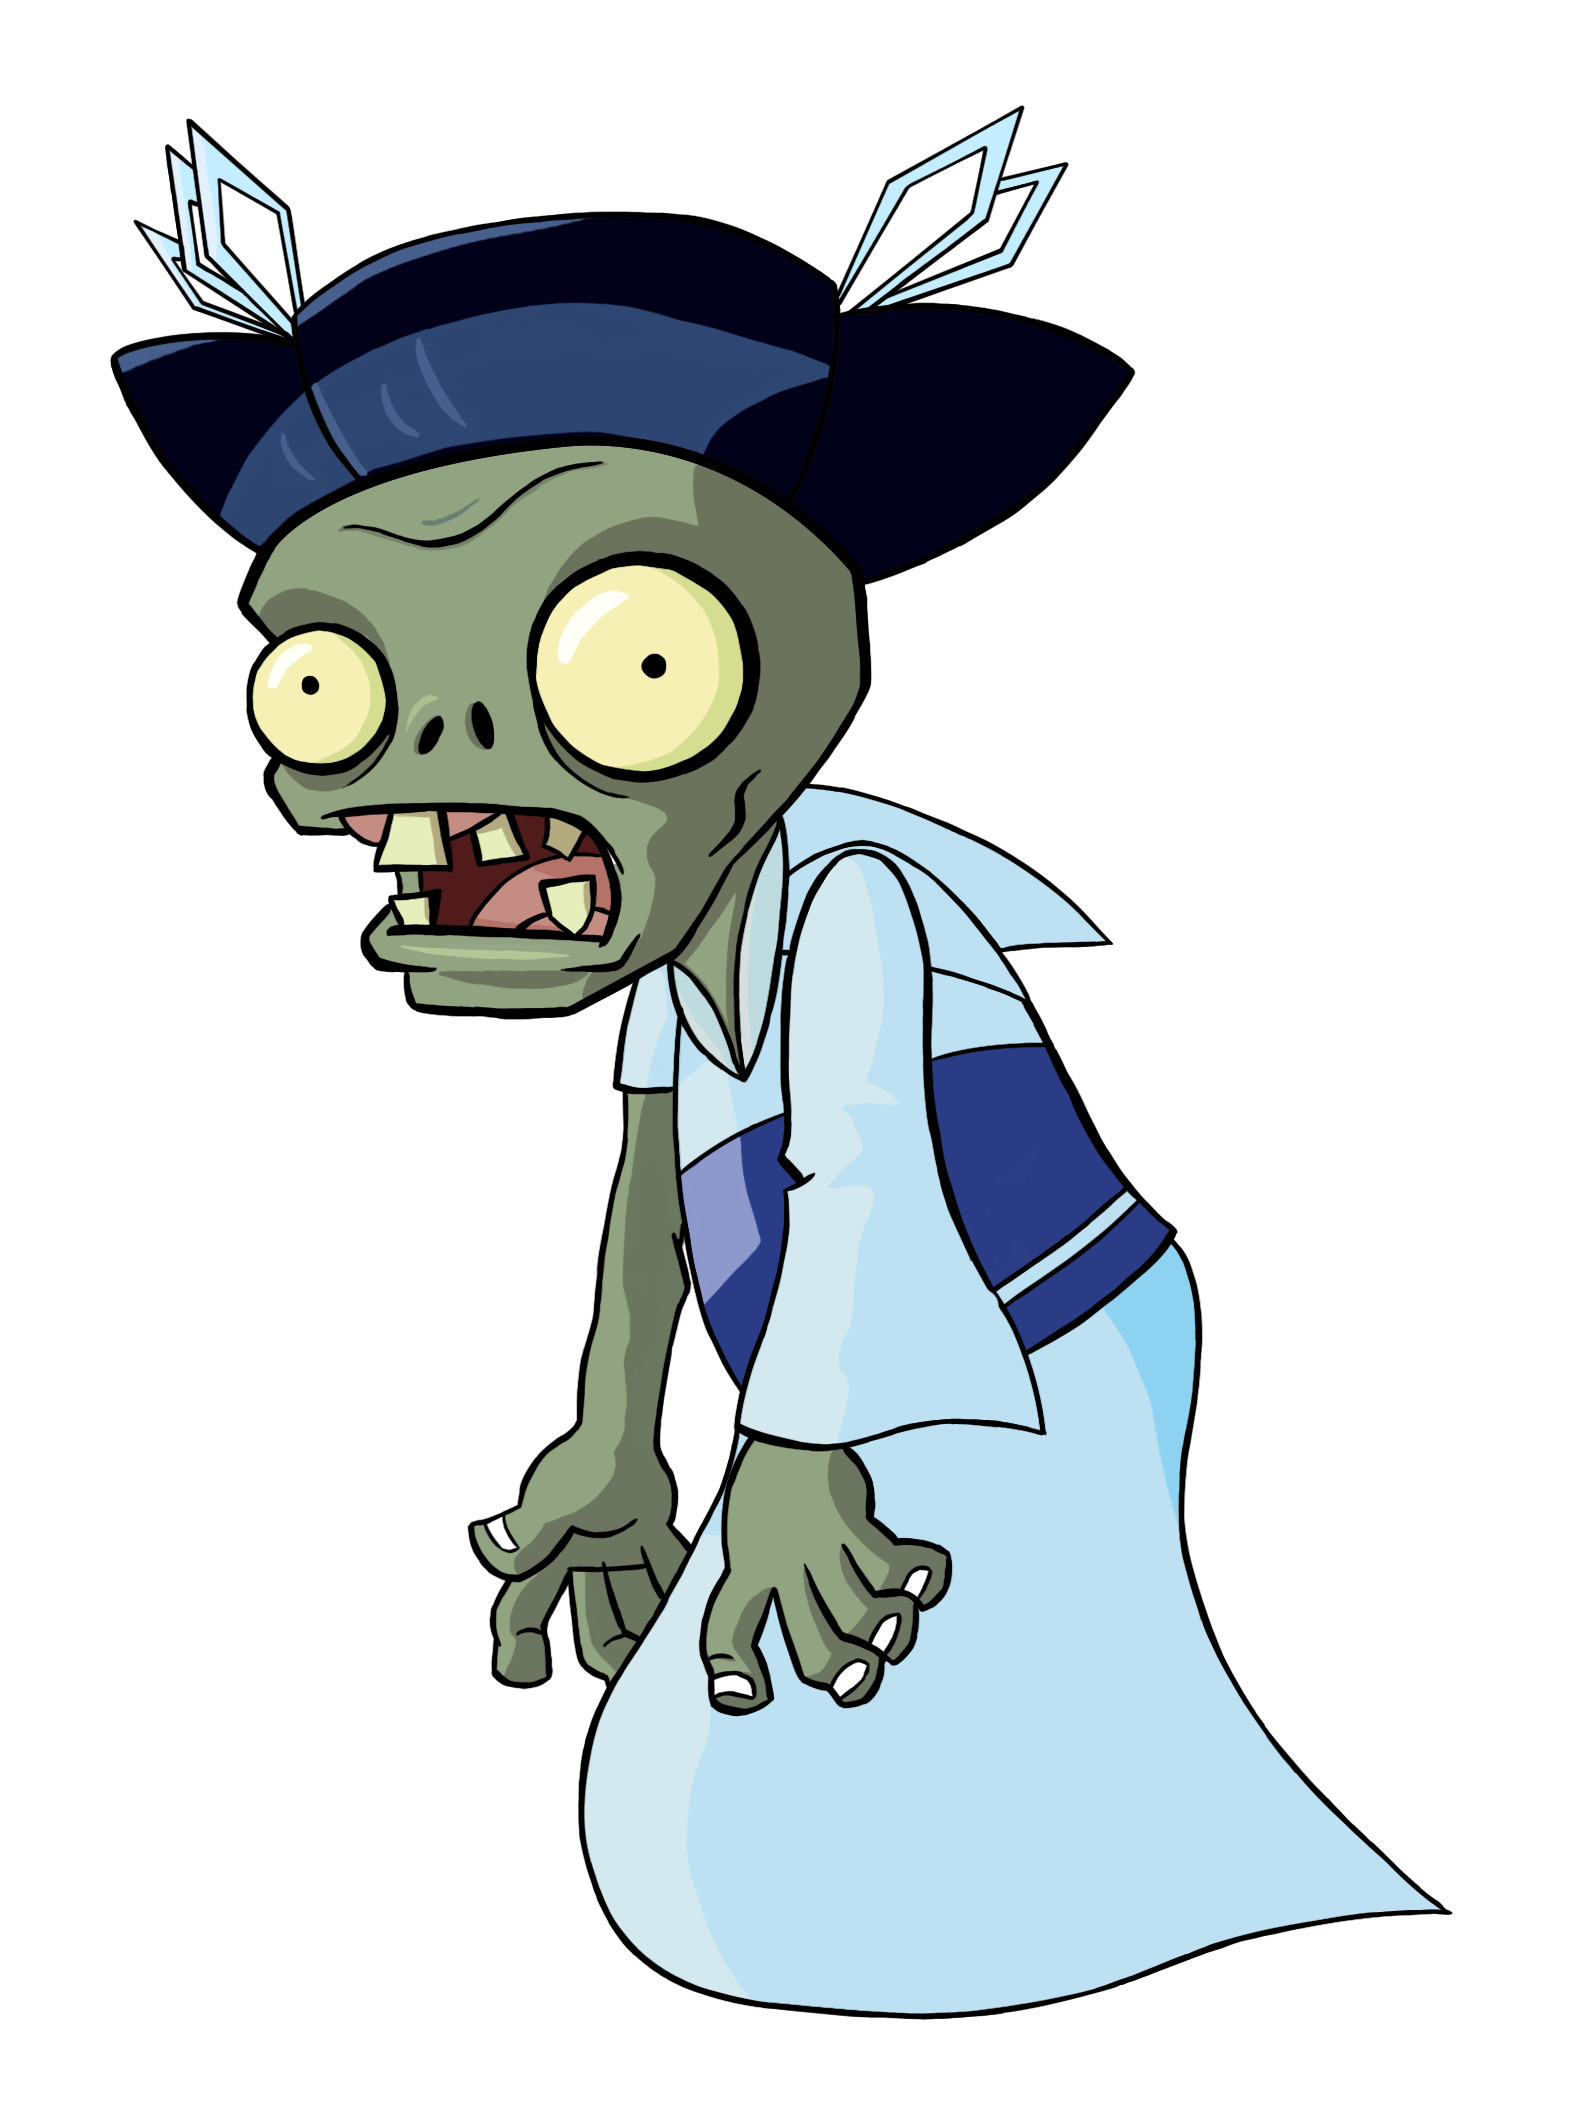 Avriel Lai - Plants vs. Zombies 2 - Plant and Zombie Characters